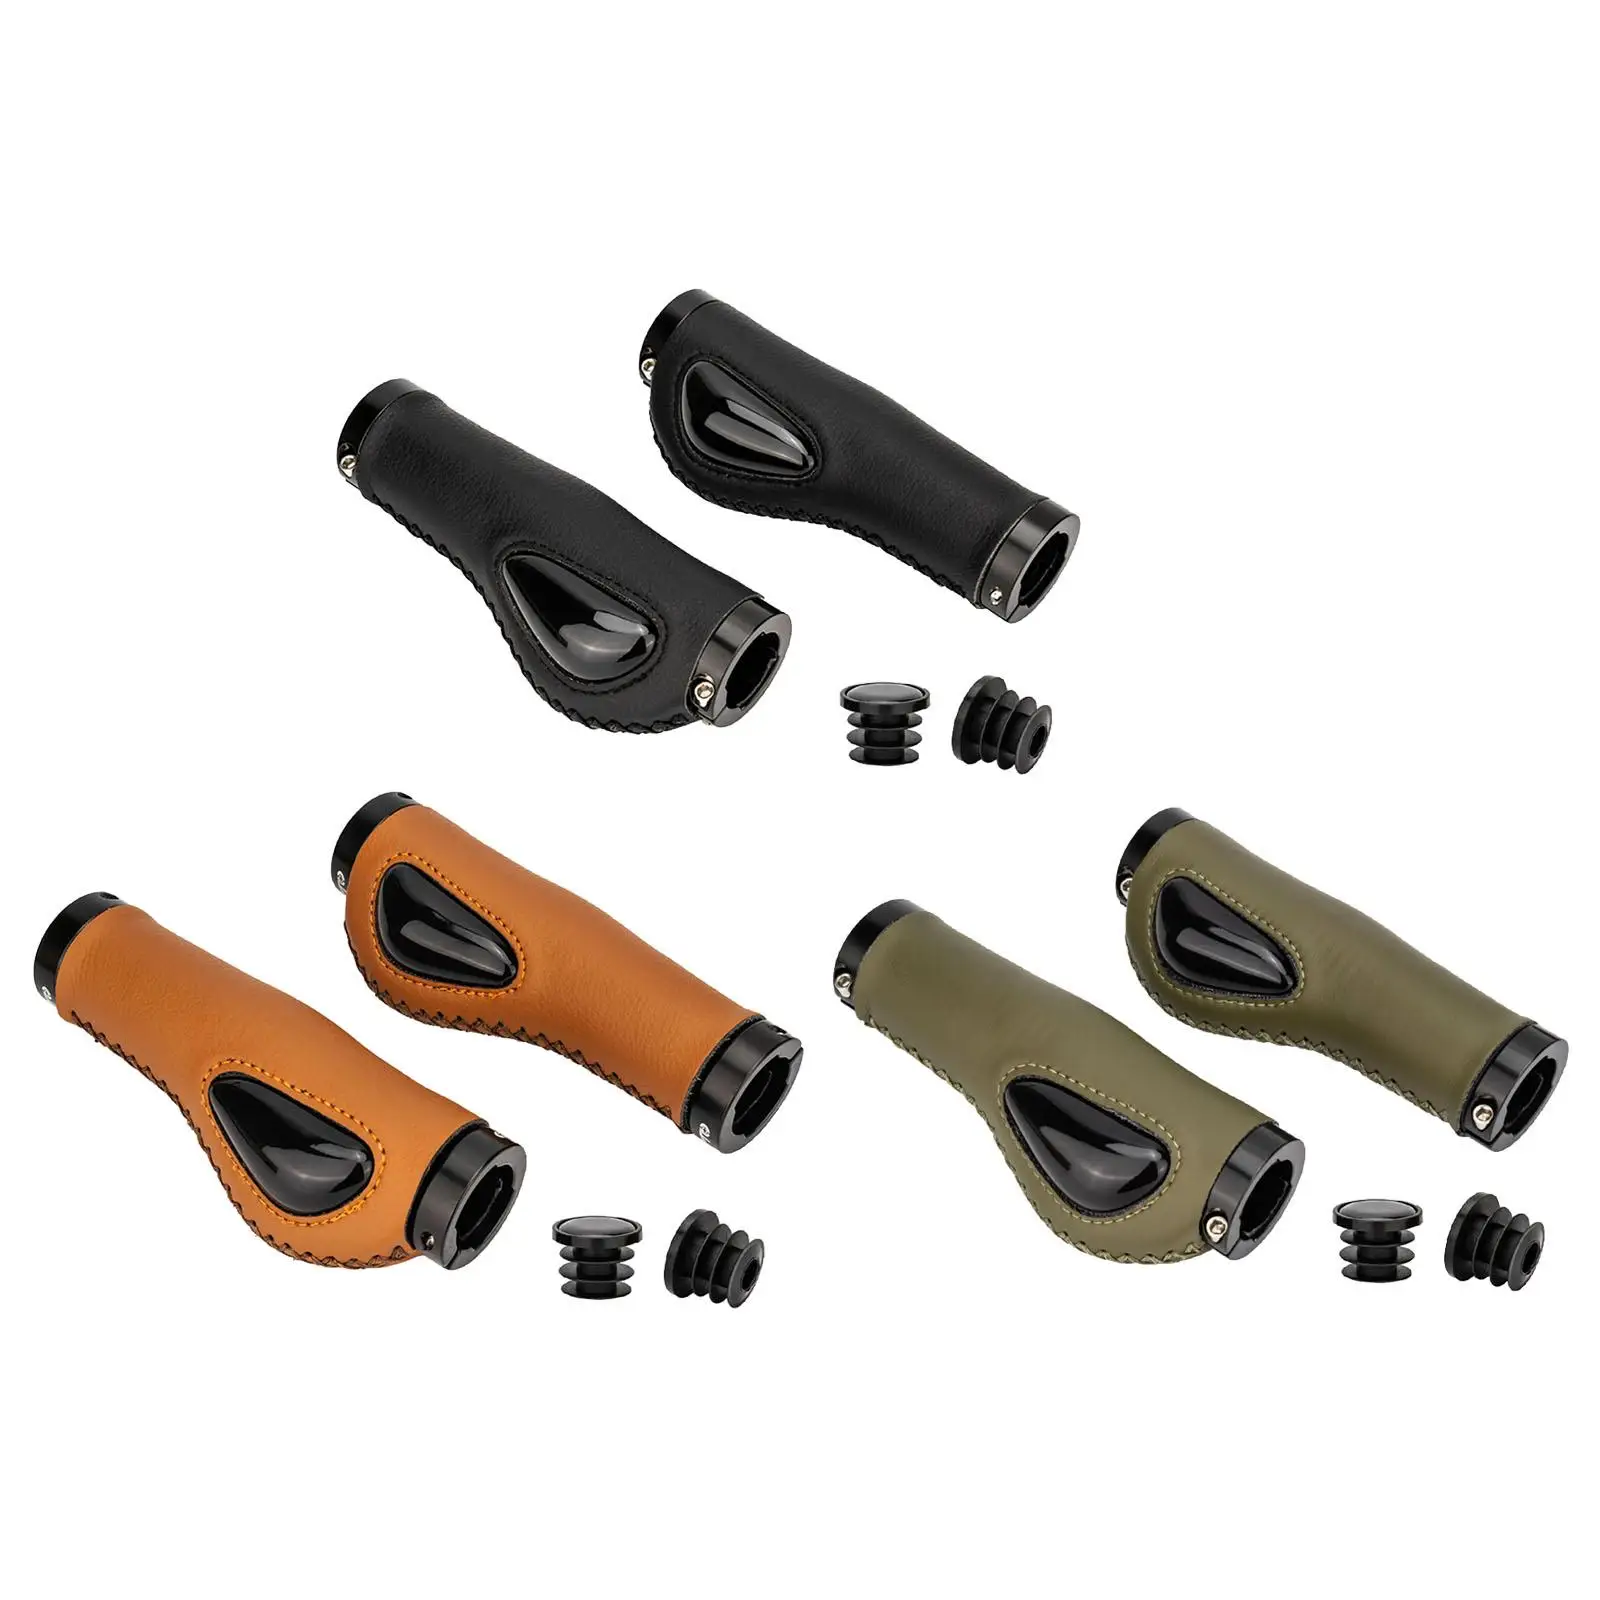 Comfort MTB Bike Handlebar Grips Shock Absorbing Liquid Silicone Sleeve Replacement for Mountain Road Bike Cycling Scooter